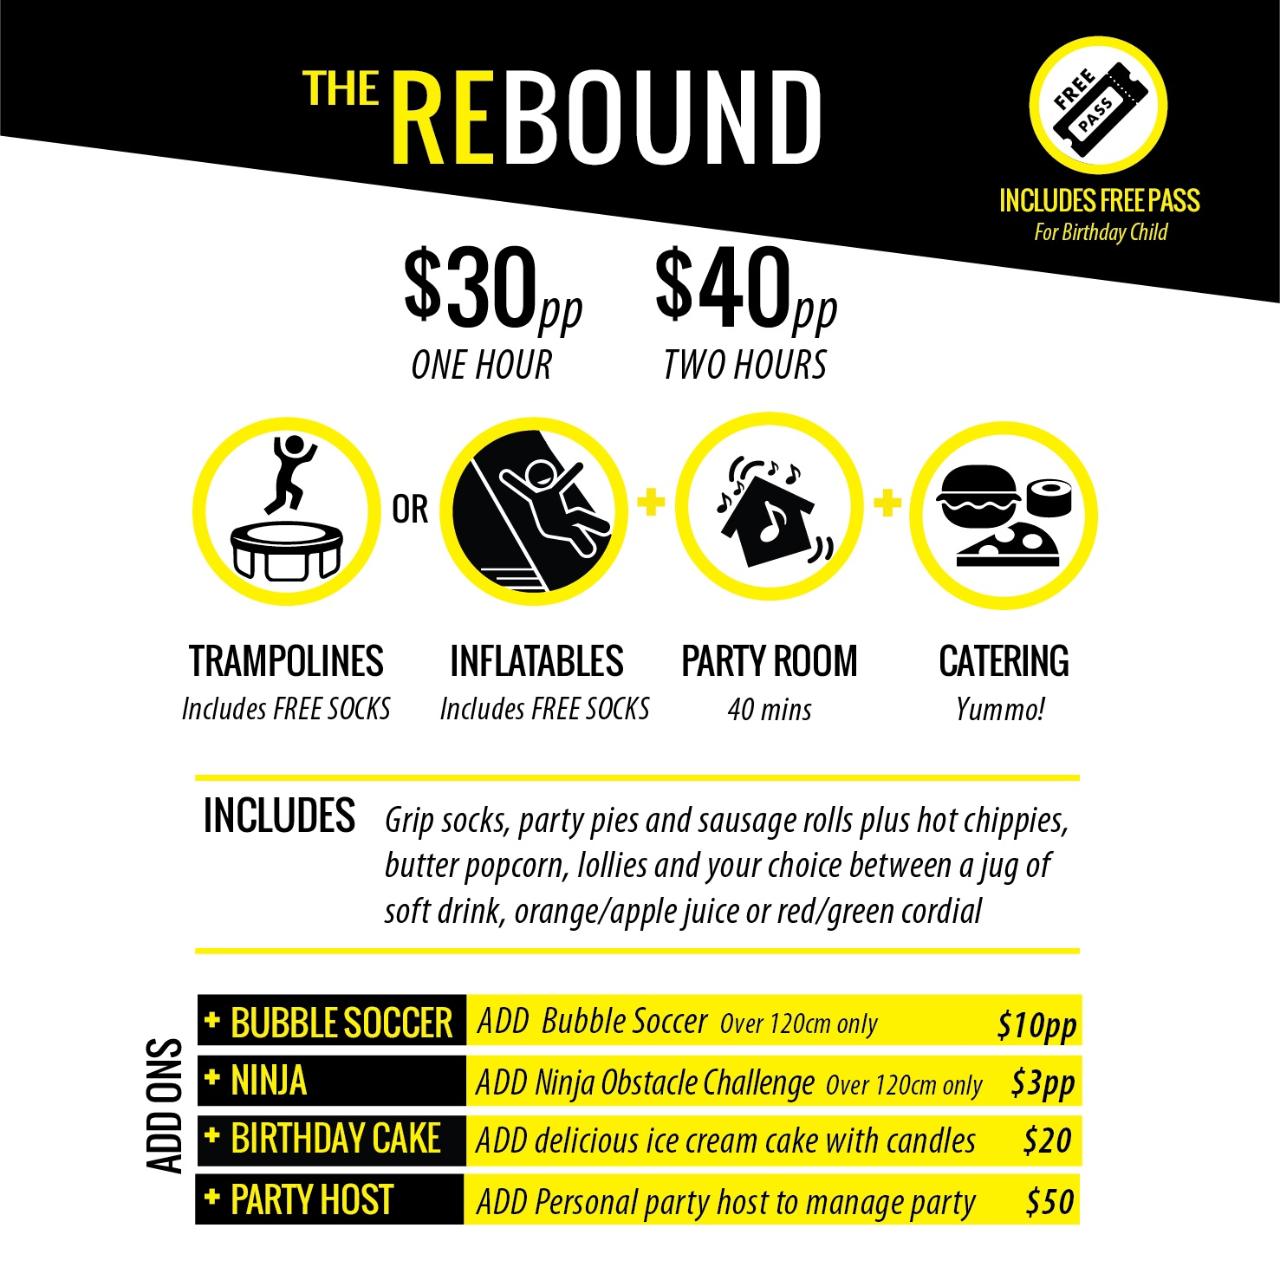 The Rebound Package